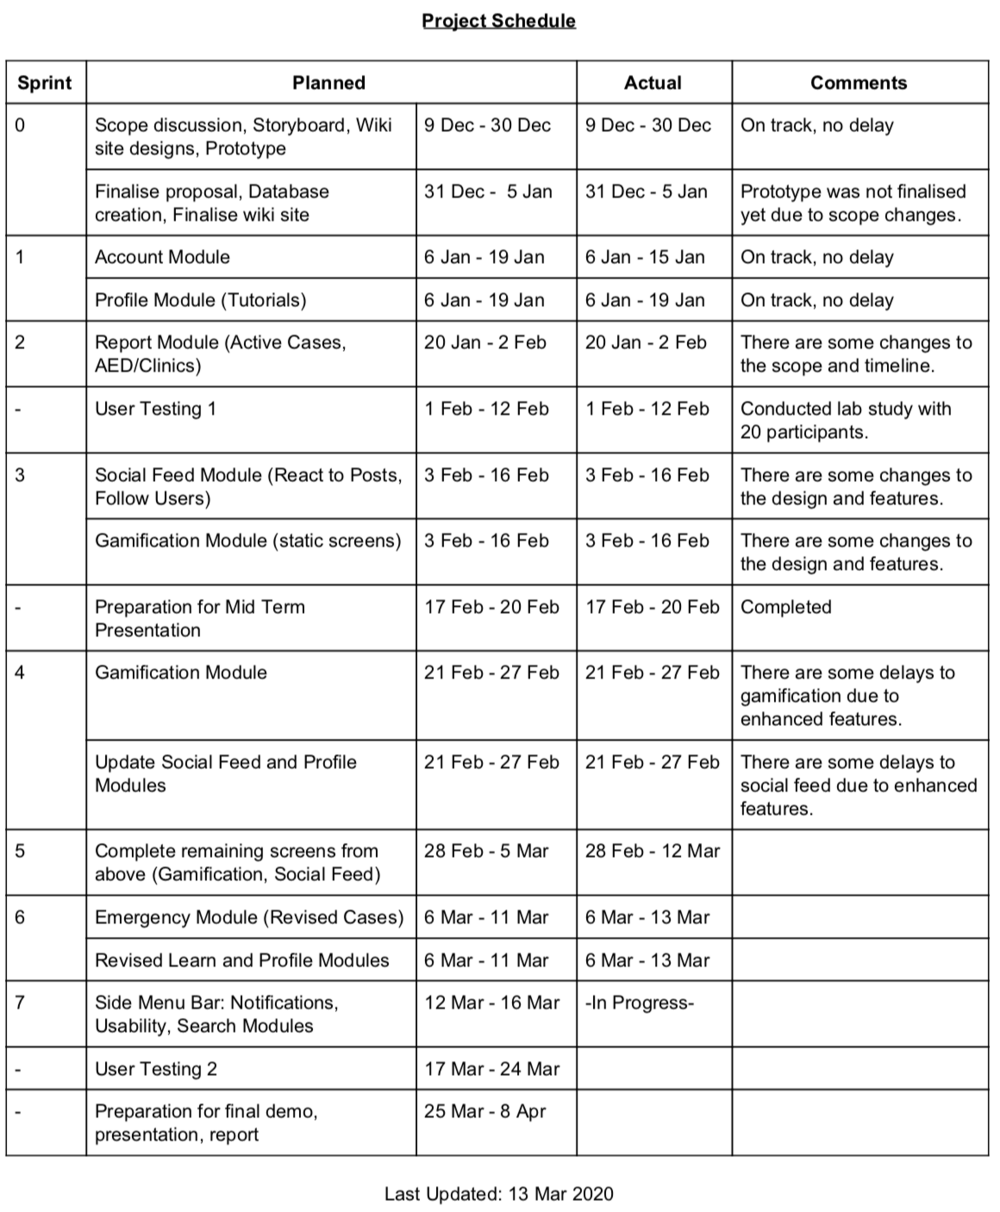 Project schedule 13 mar.png